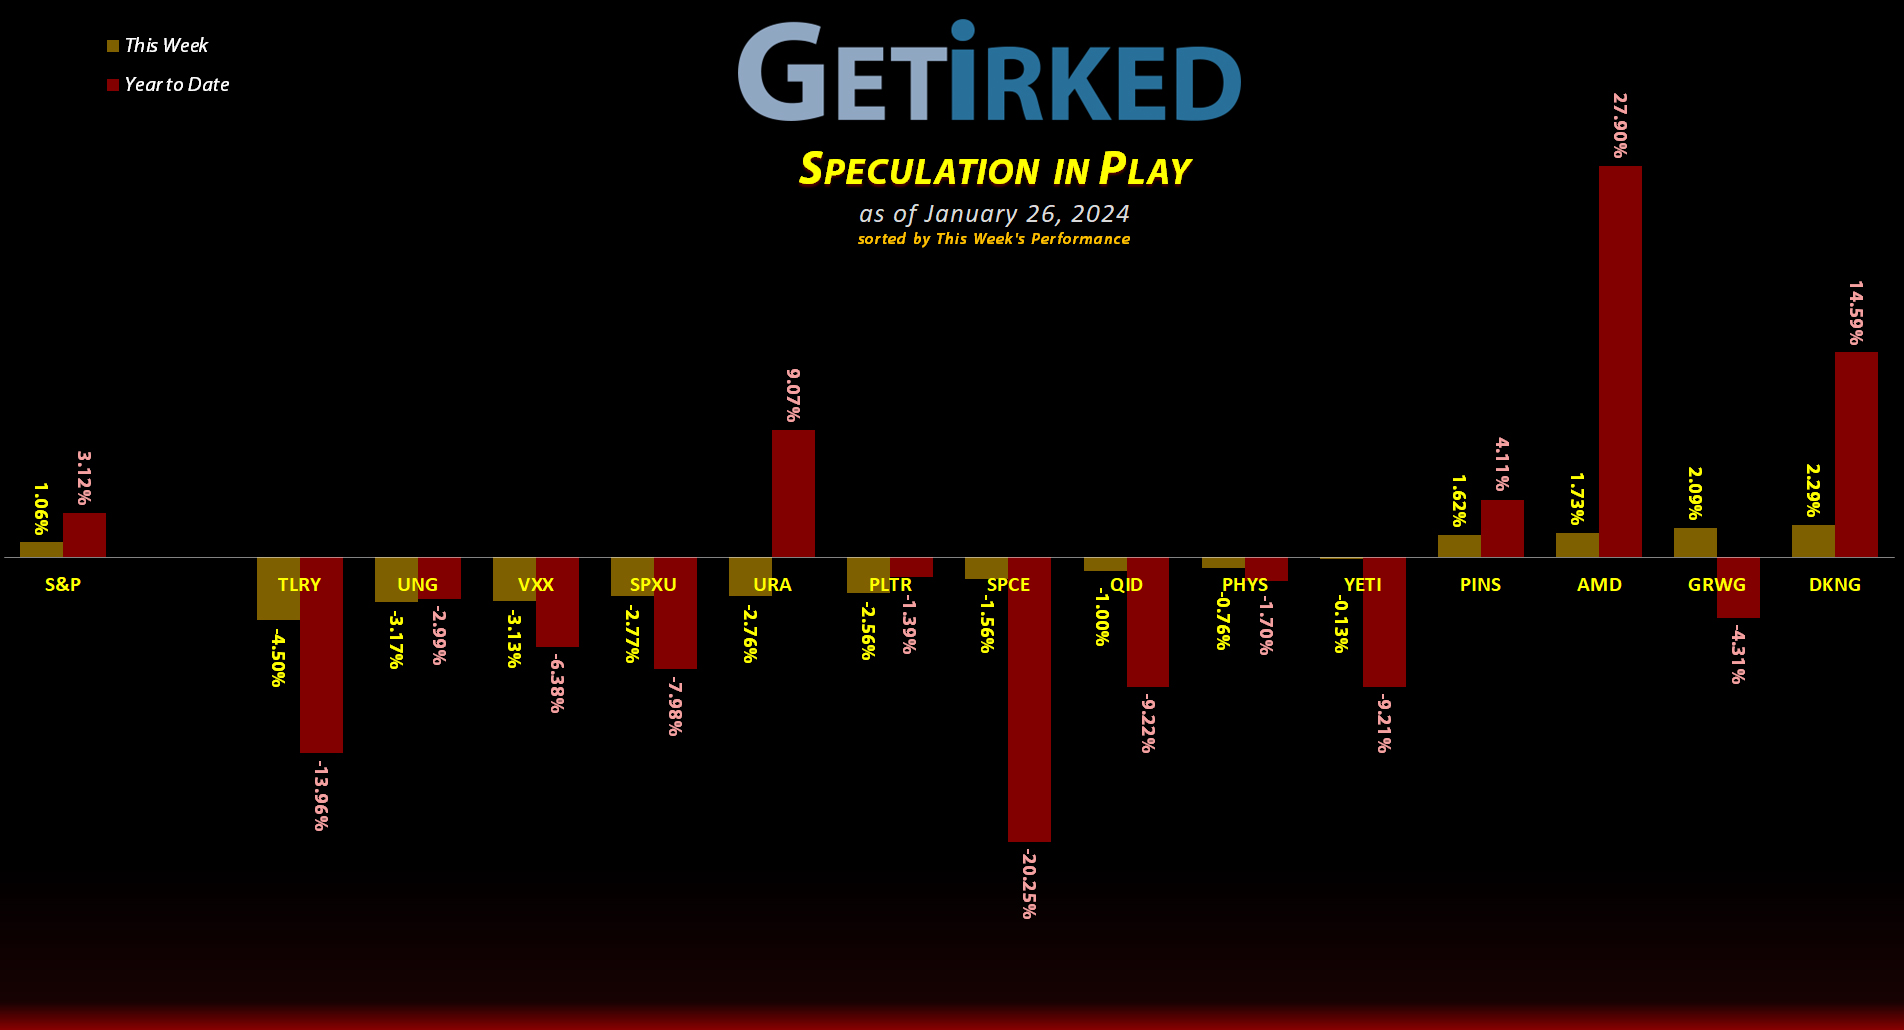 Get Irked's Speculation in Play - January 26, 2024